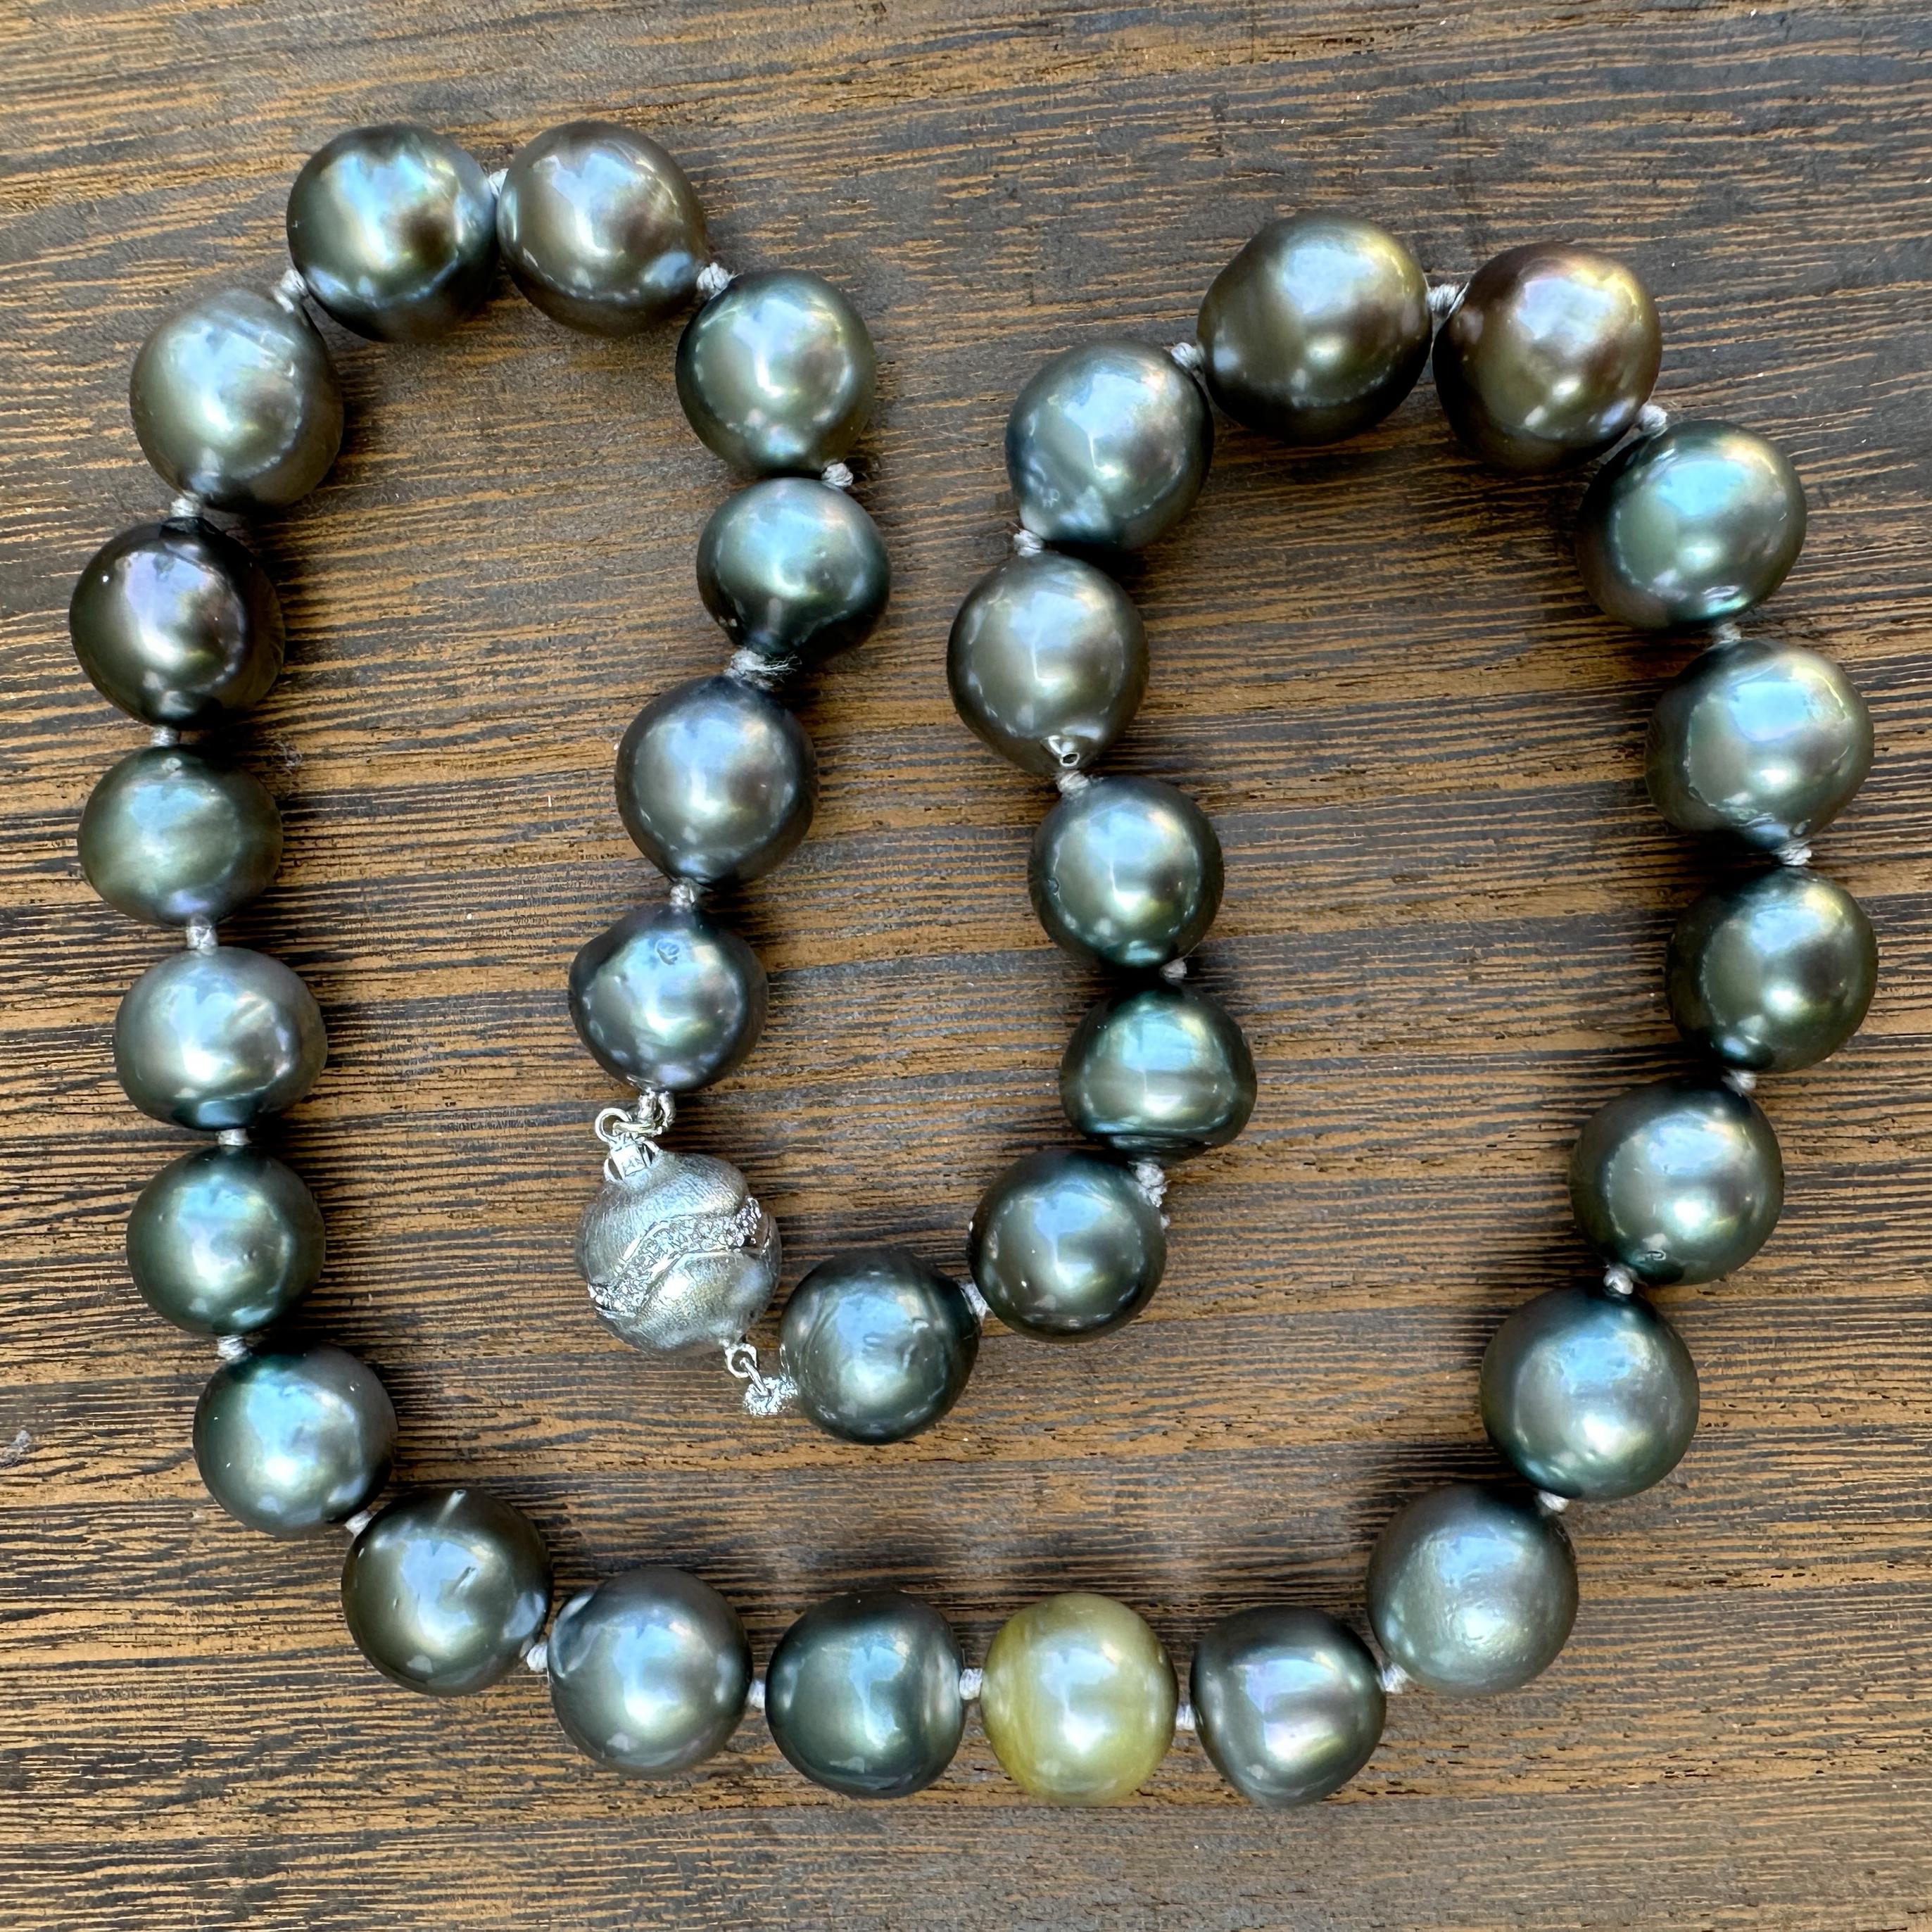 Choker-Length Strand of 11.5mm Tahitian Pearls w White Gold & Diamond Ball Clasp In New Condition For Sale In Sherman Oaks, CA